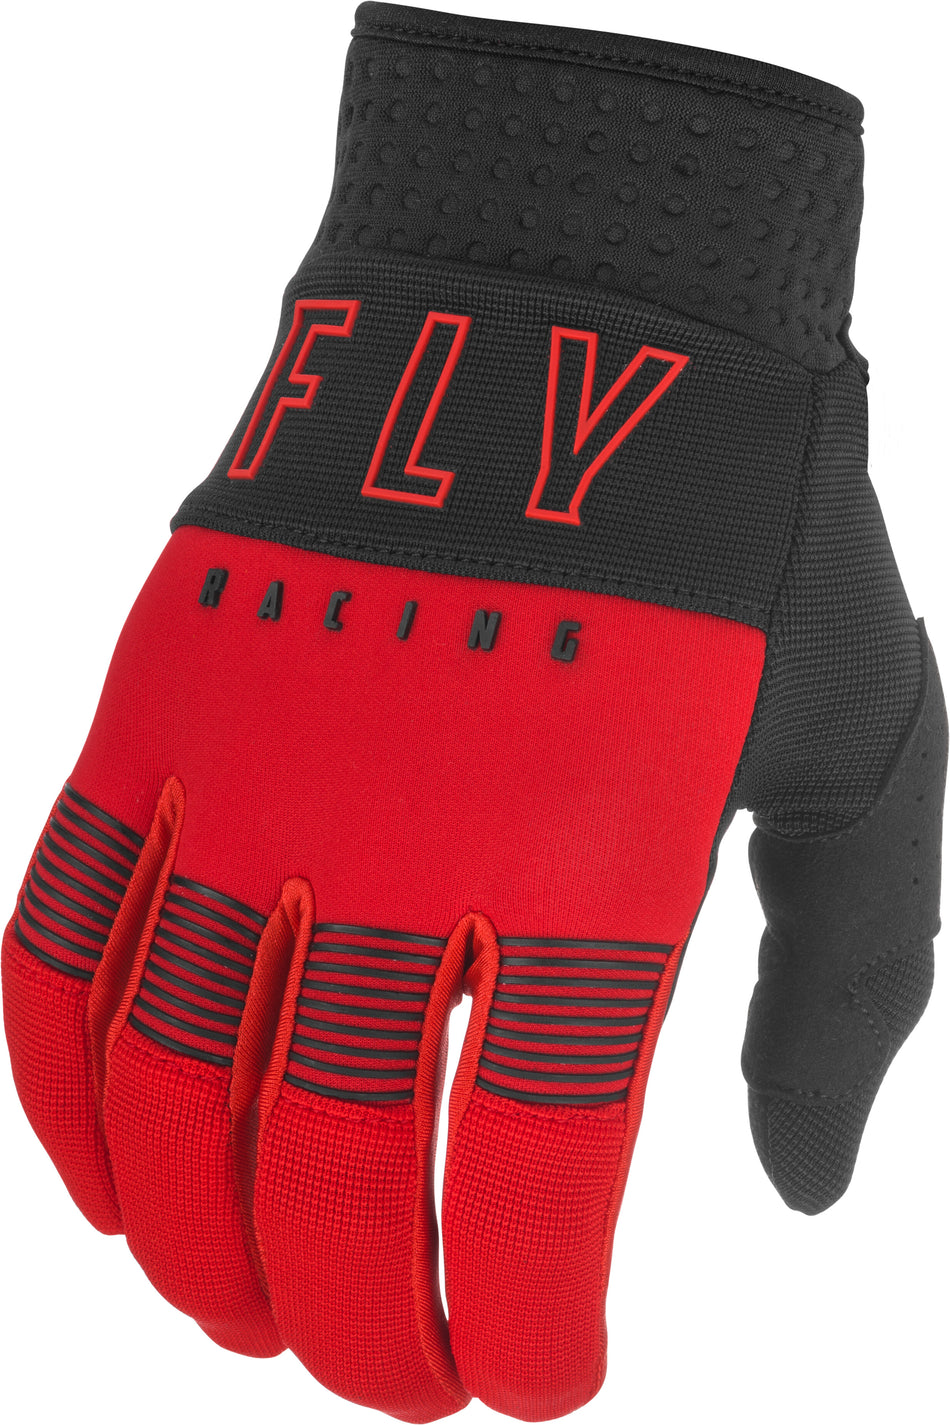 FLY RACING Youth F-16 Gloves Red/Black Sz 02 374-91202